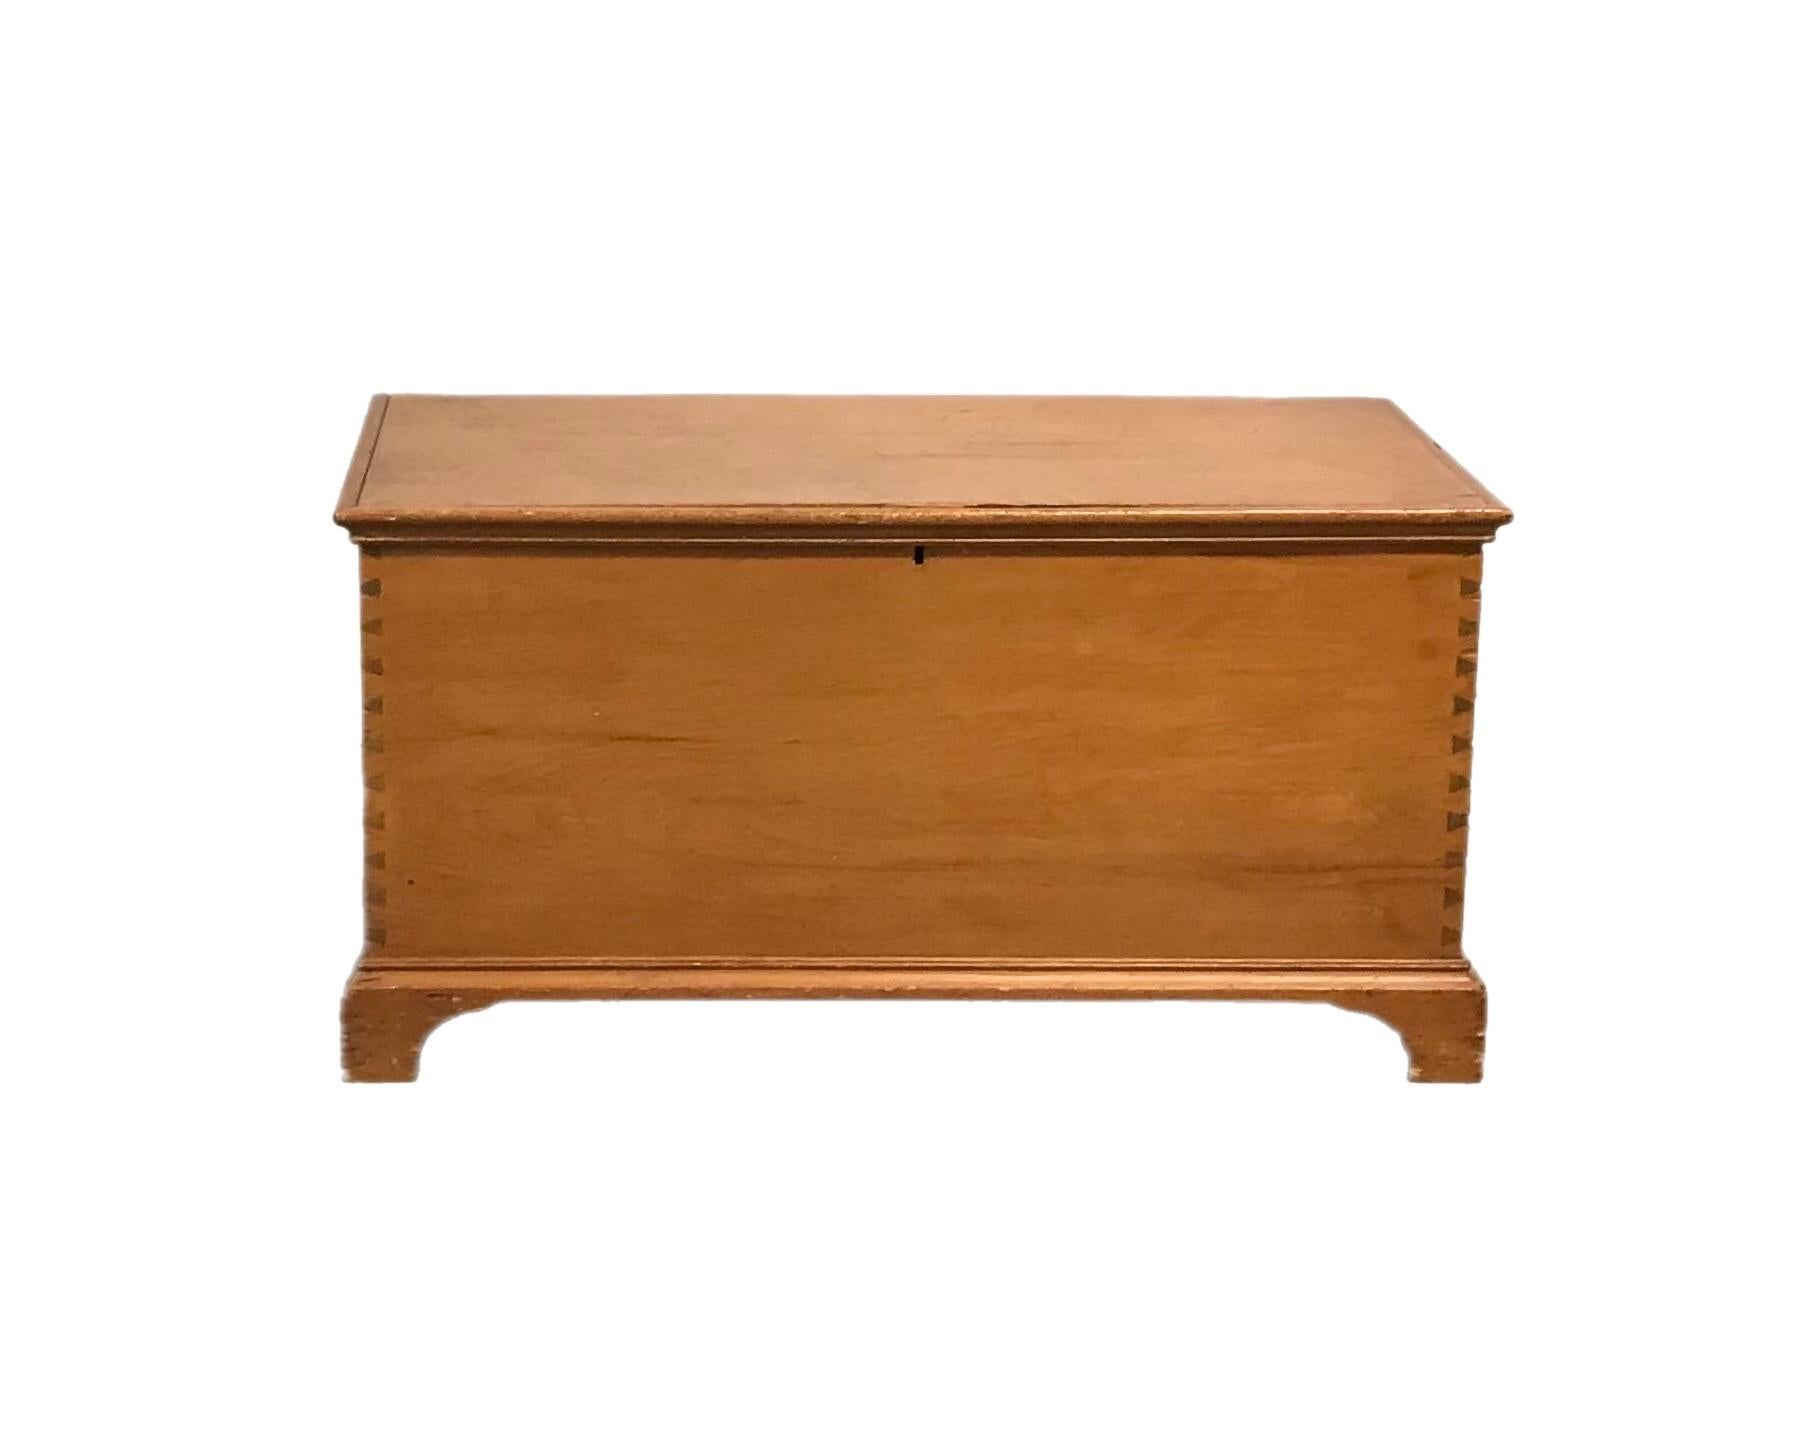 Charming American blanket chest with simple lines and very nice condition.